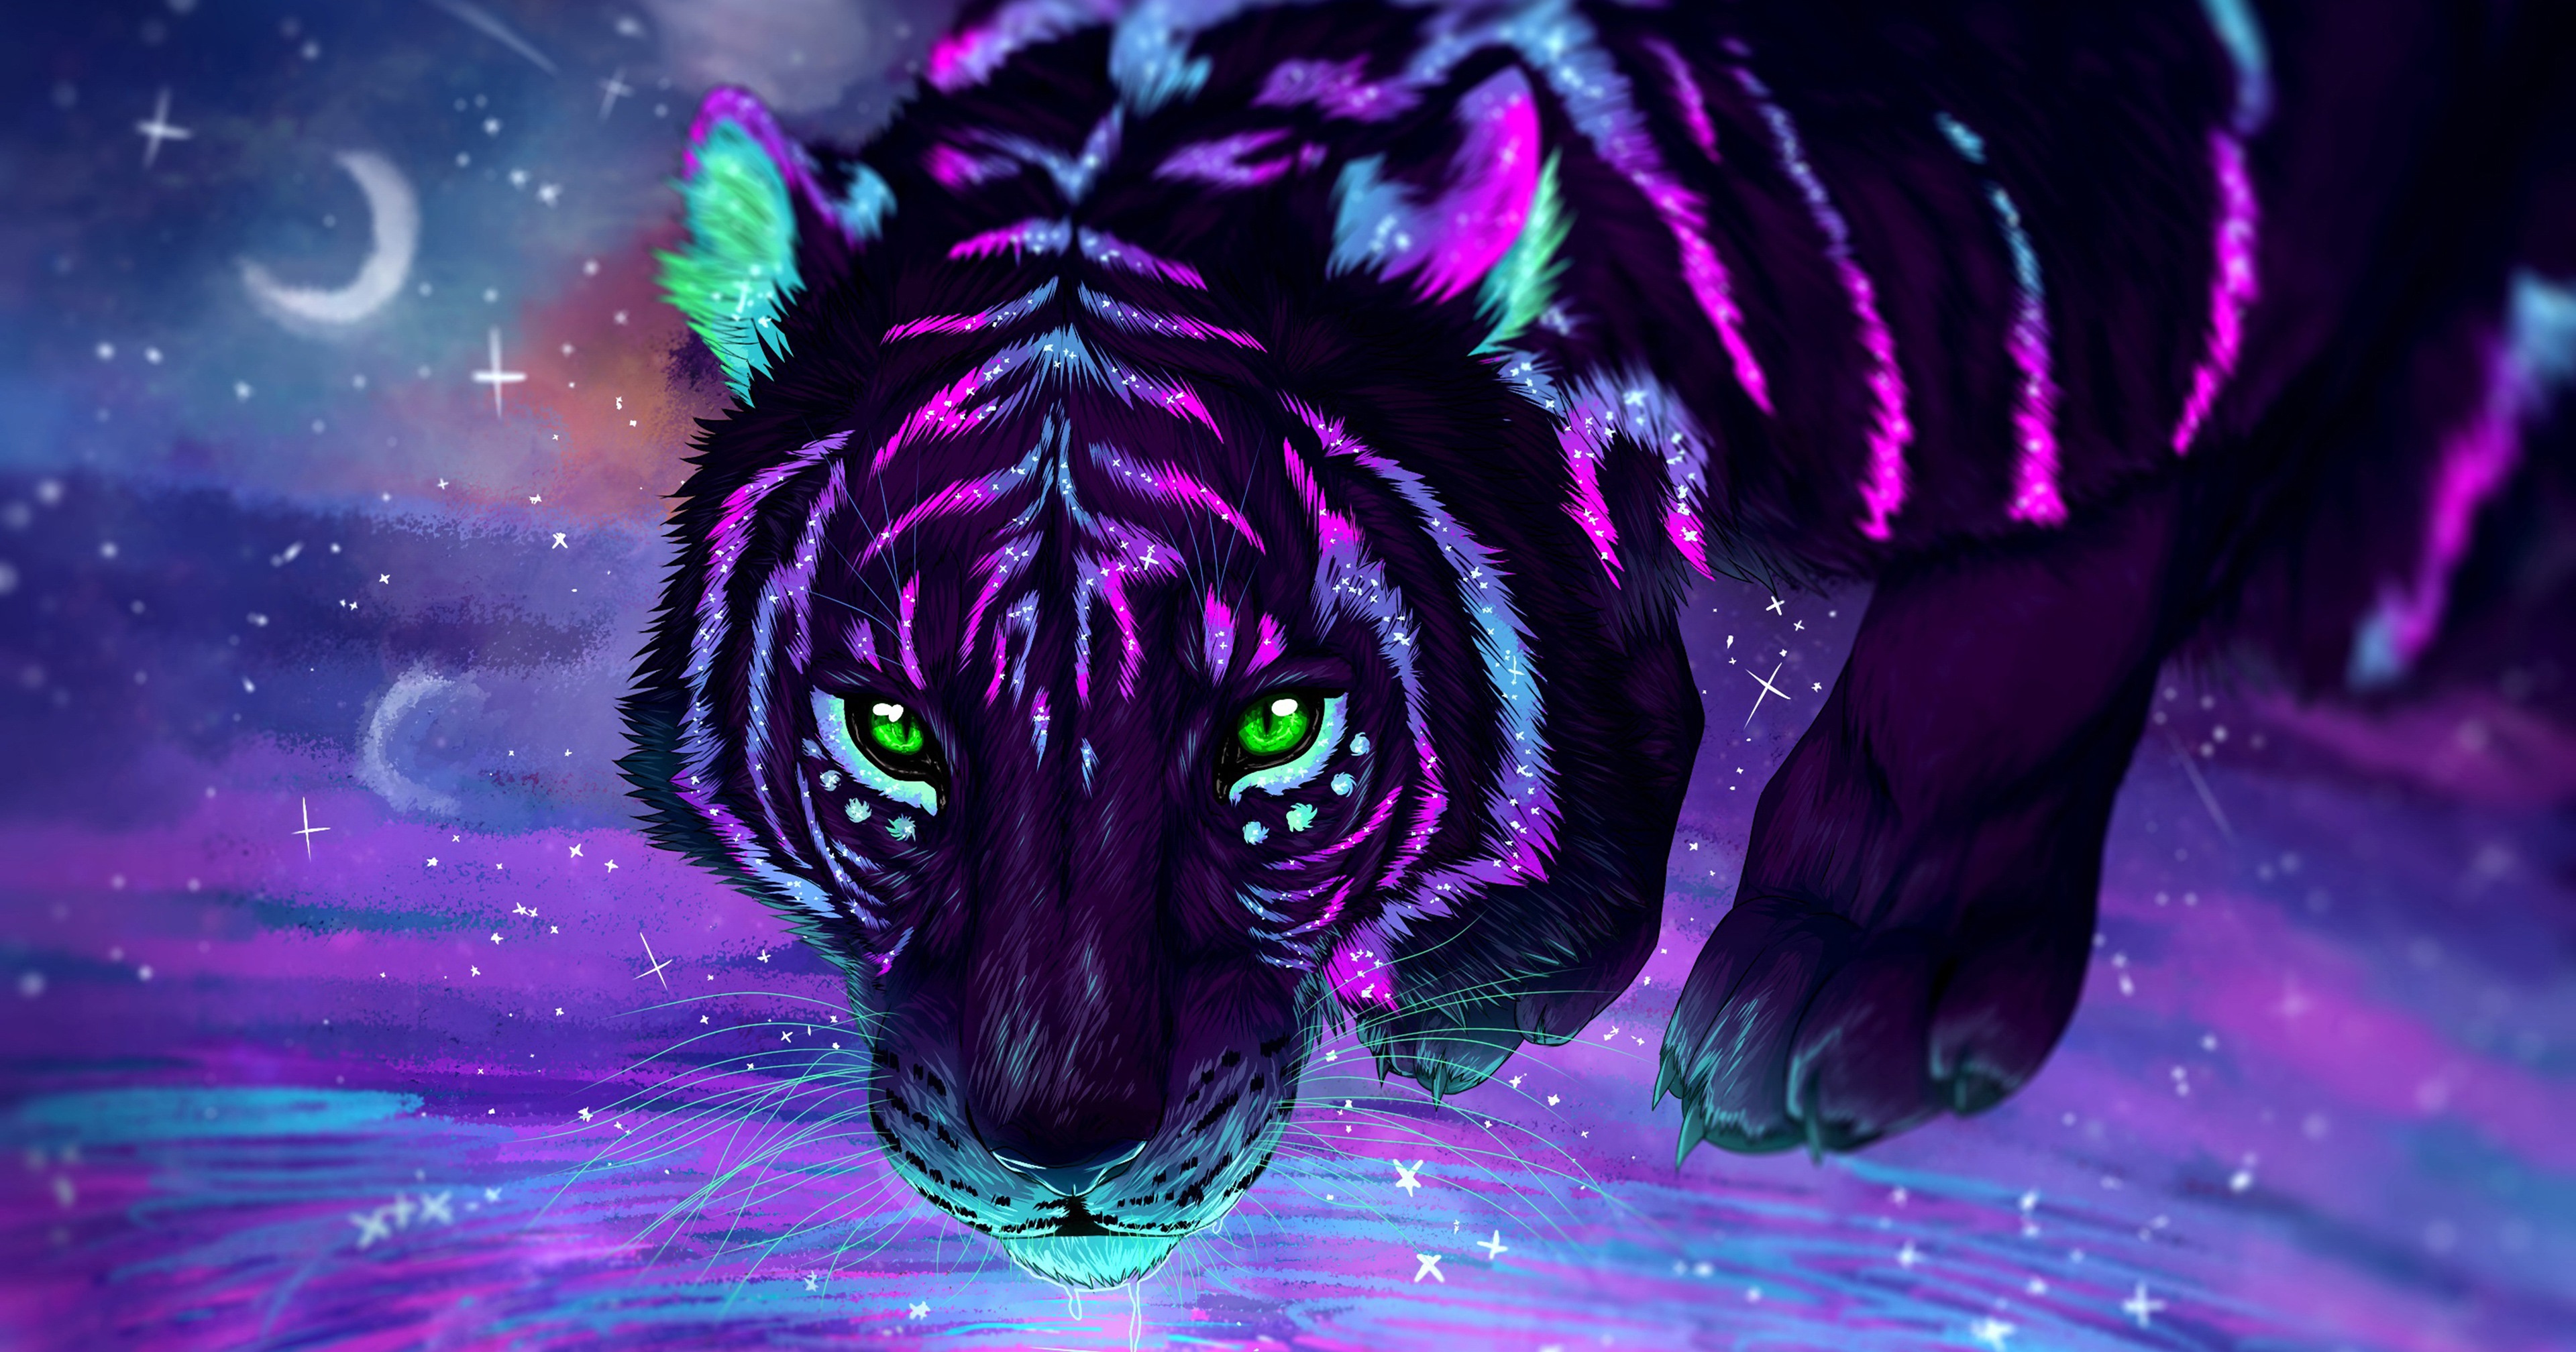 Tiger Animals Head Sky Space Illustration Sunset Lights Dark Night Nature Glowing Wildcats Concept A 3840x2016